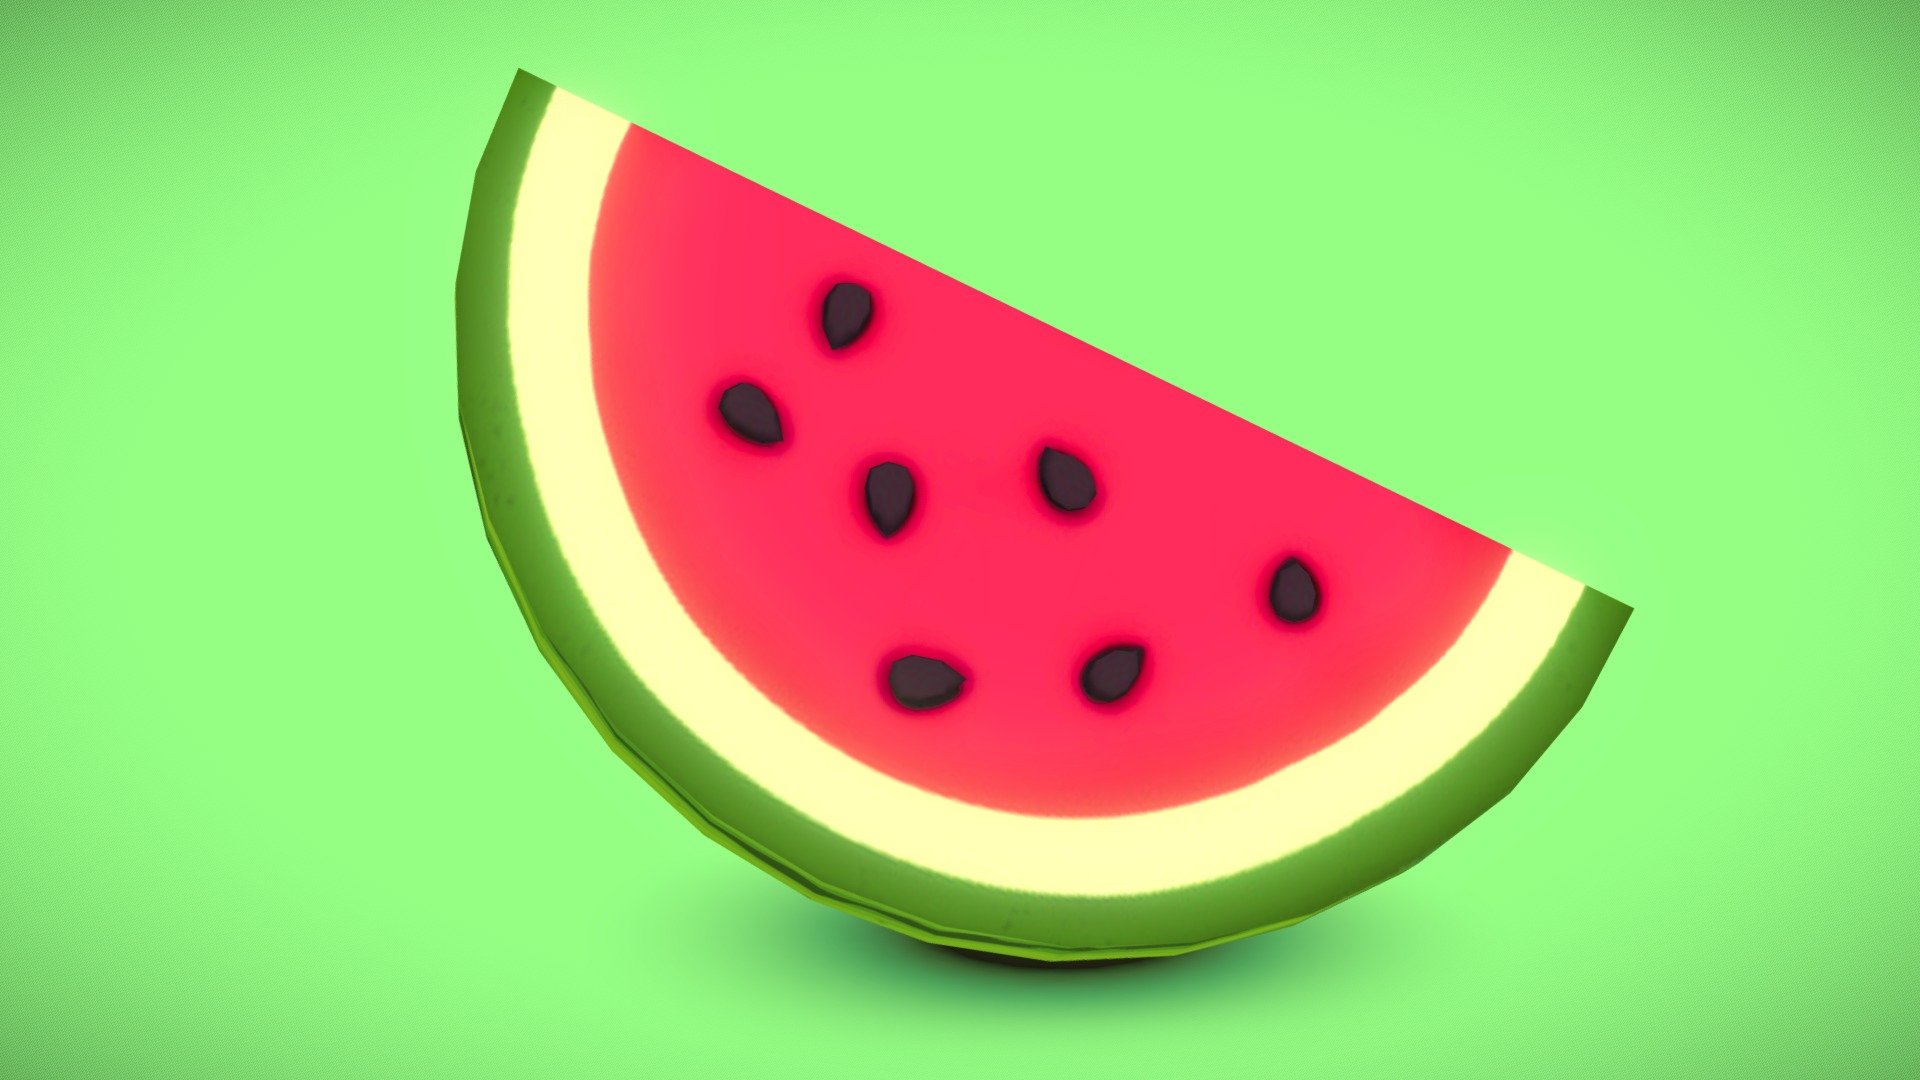 Low poly Watermelon Emoji - Made with Blender 2.79

OBJ , FBX and .blend file are  provided in the additional files 🍉🍉🍉 - Watermelon Emoji iOS ( 3D Model ) - Buy Royalty Free 3D model by Alexander Belalis | Digital Artist (@alexbelalisdesigns) 3d model